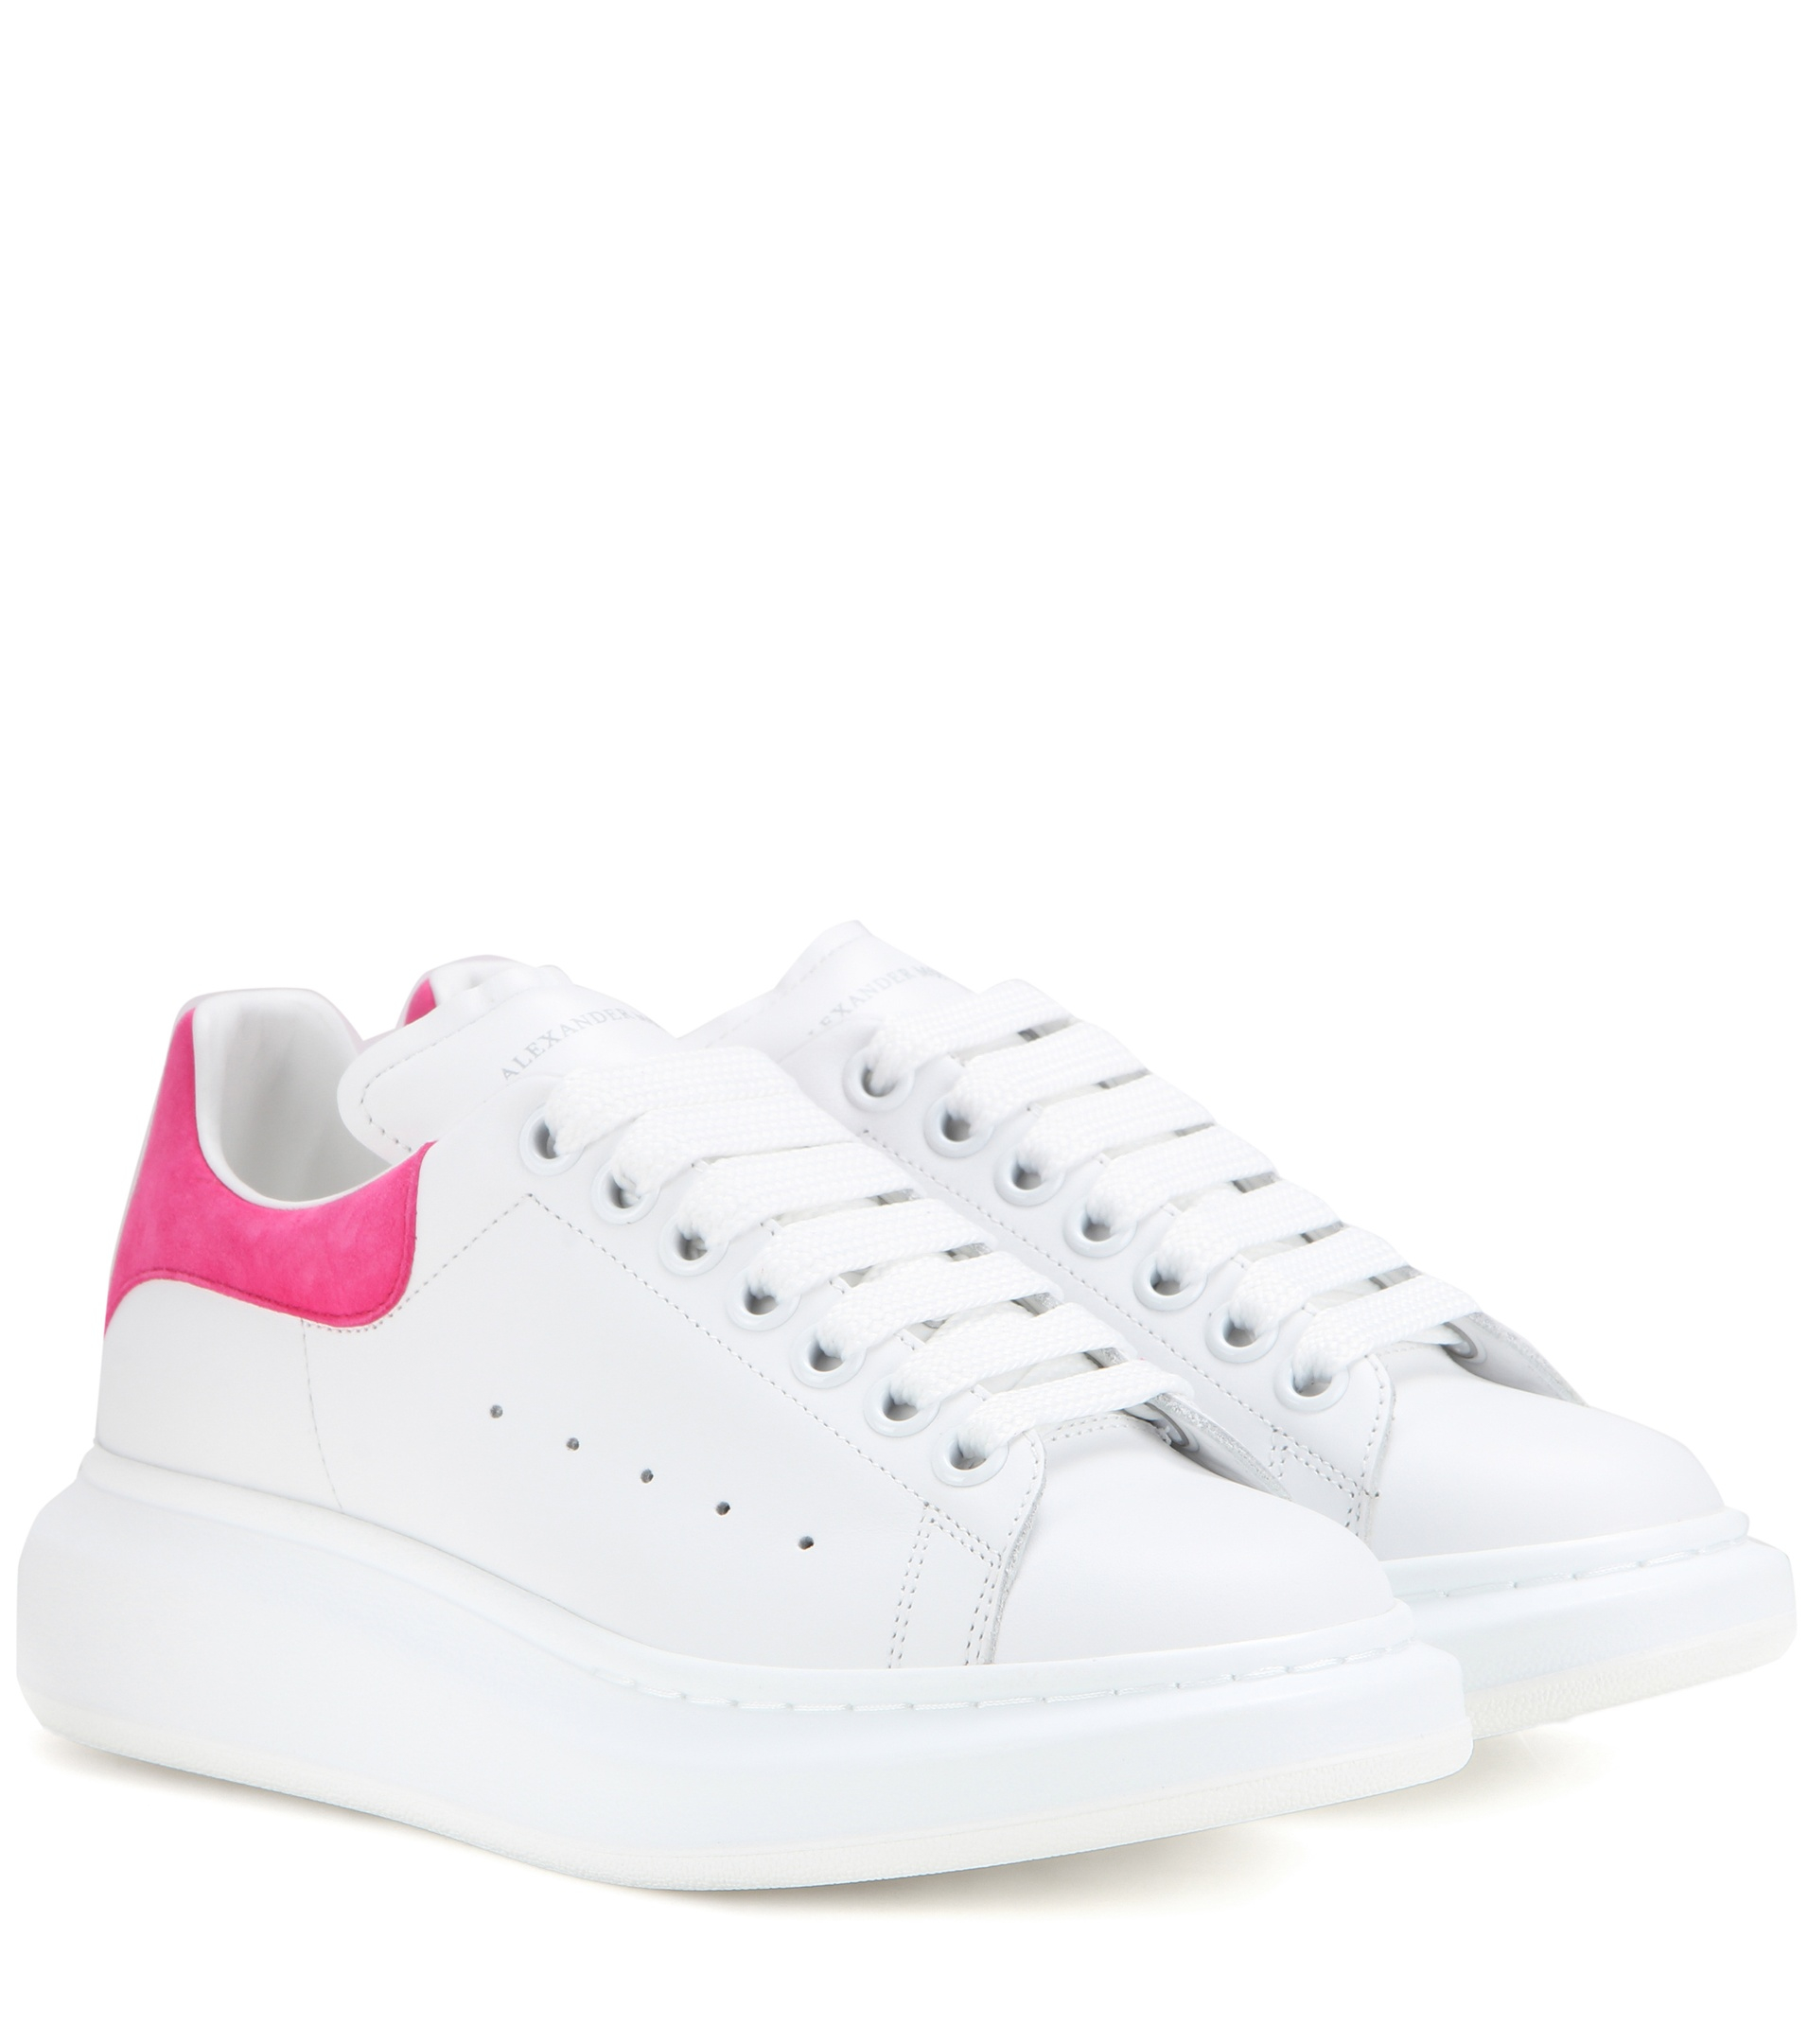 Lyst - Alexander McQueen Leather Sneakers in White